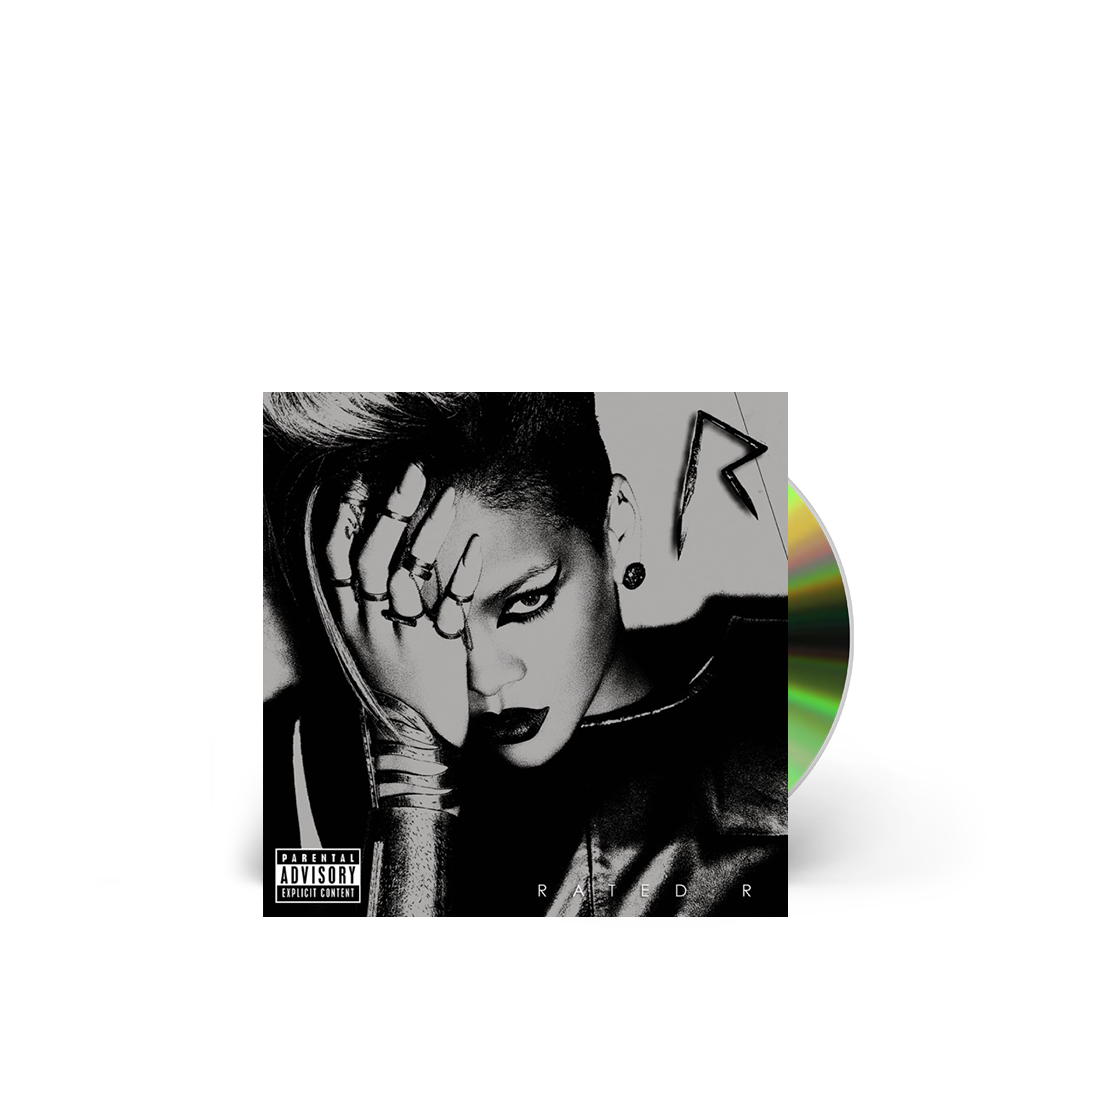 Rated R: CD